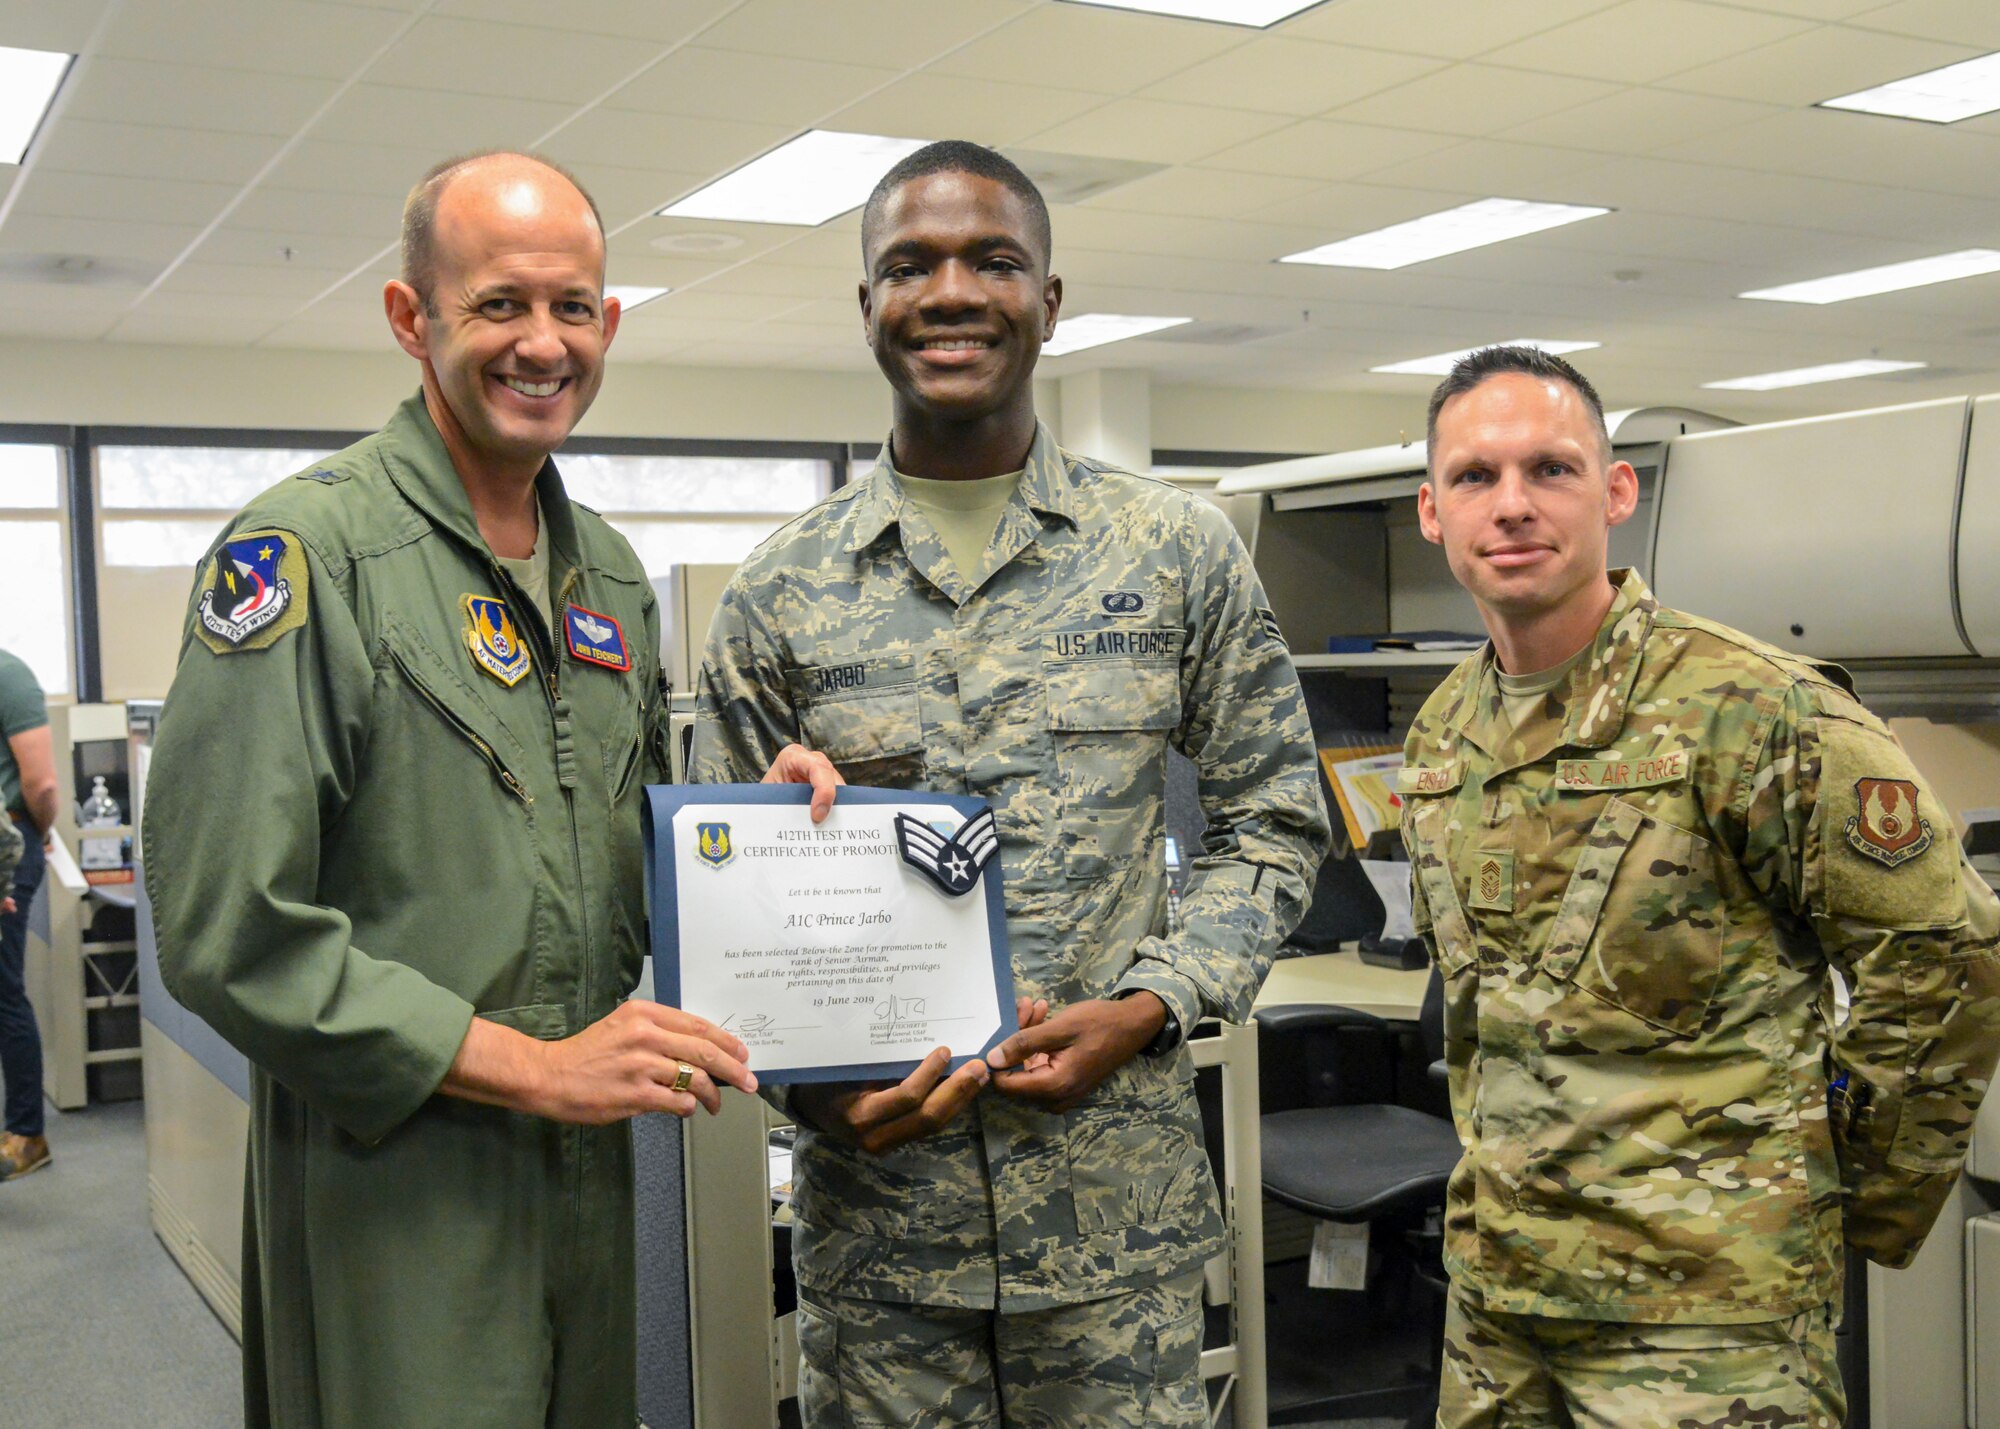 Senior Airman Prince Jarbo, 412th Comptroller Squadron, poses for a photo with Brig. E. John Teichert, 412th Test Wing Commander, and Command Chief Master Sgt. Ian Eishen, 412th Test Wing Command Chief, during his promotion ceremony at Edwards Air Force Base, California, June 19. (Air Force photo by Giancarlo Casem)